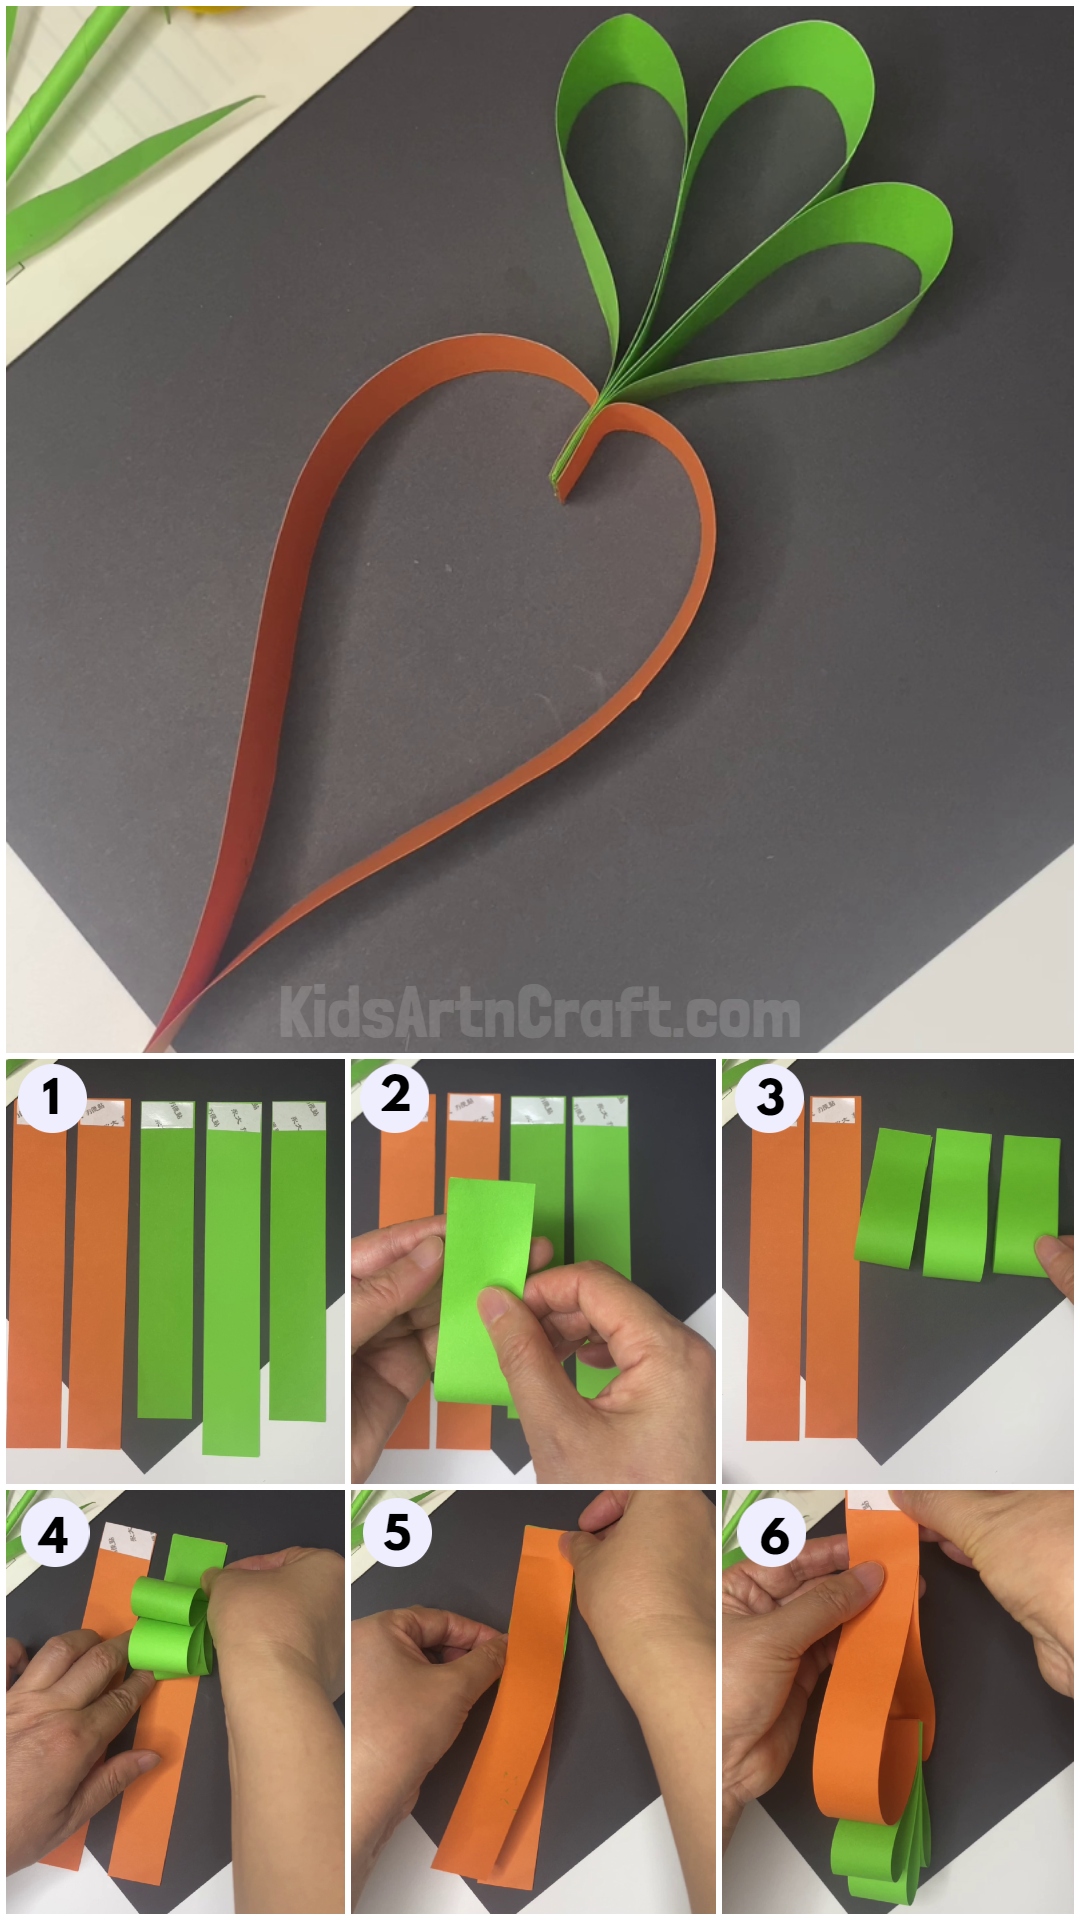 Paper Carrot Craft Step by Step Tutorial for Kids